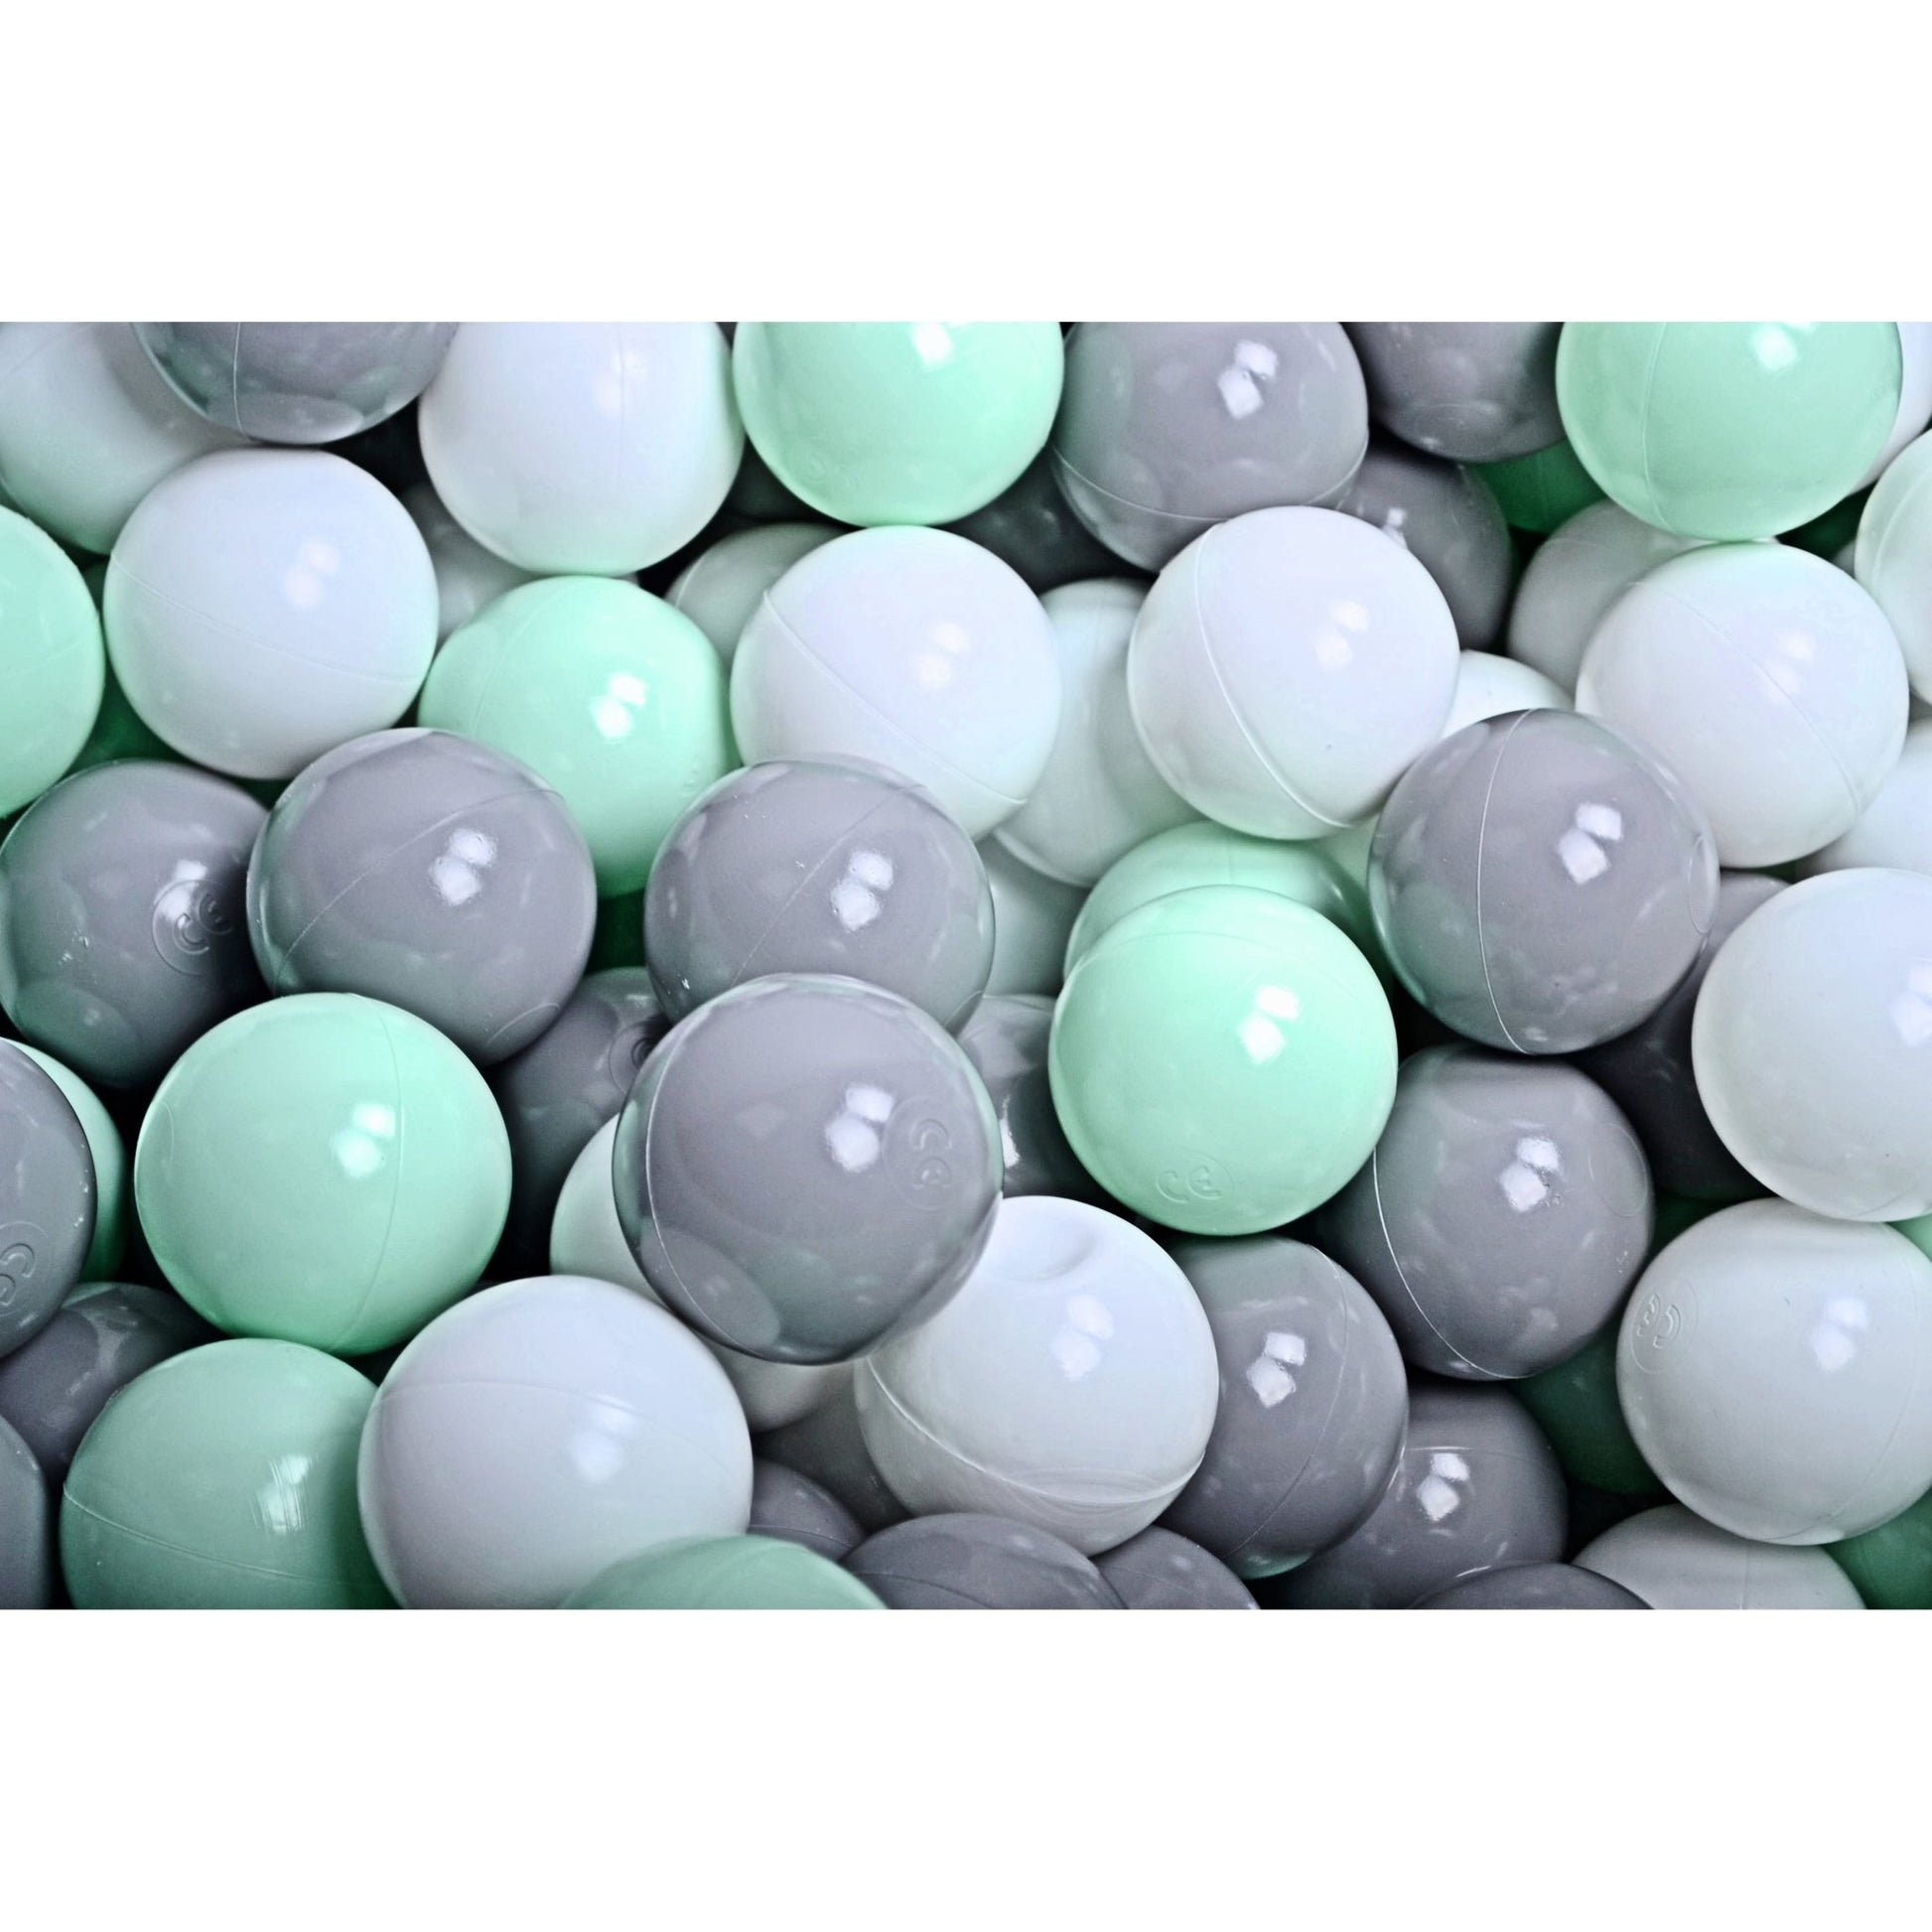 Fluffy White Boucle Round Foam Ball Pit - Select Your Own Balls - The Online Toy Shop - Ball Pit - 6